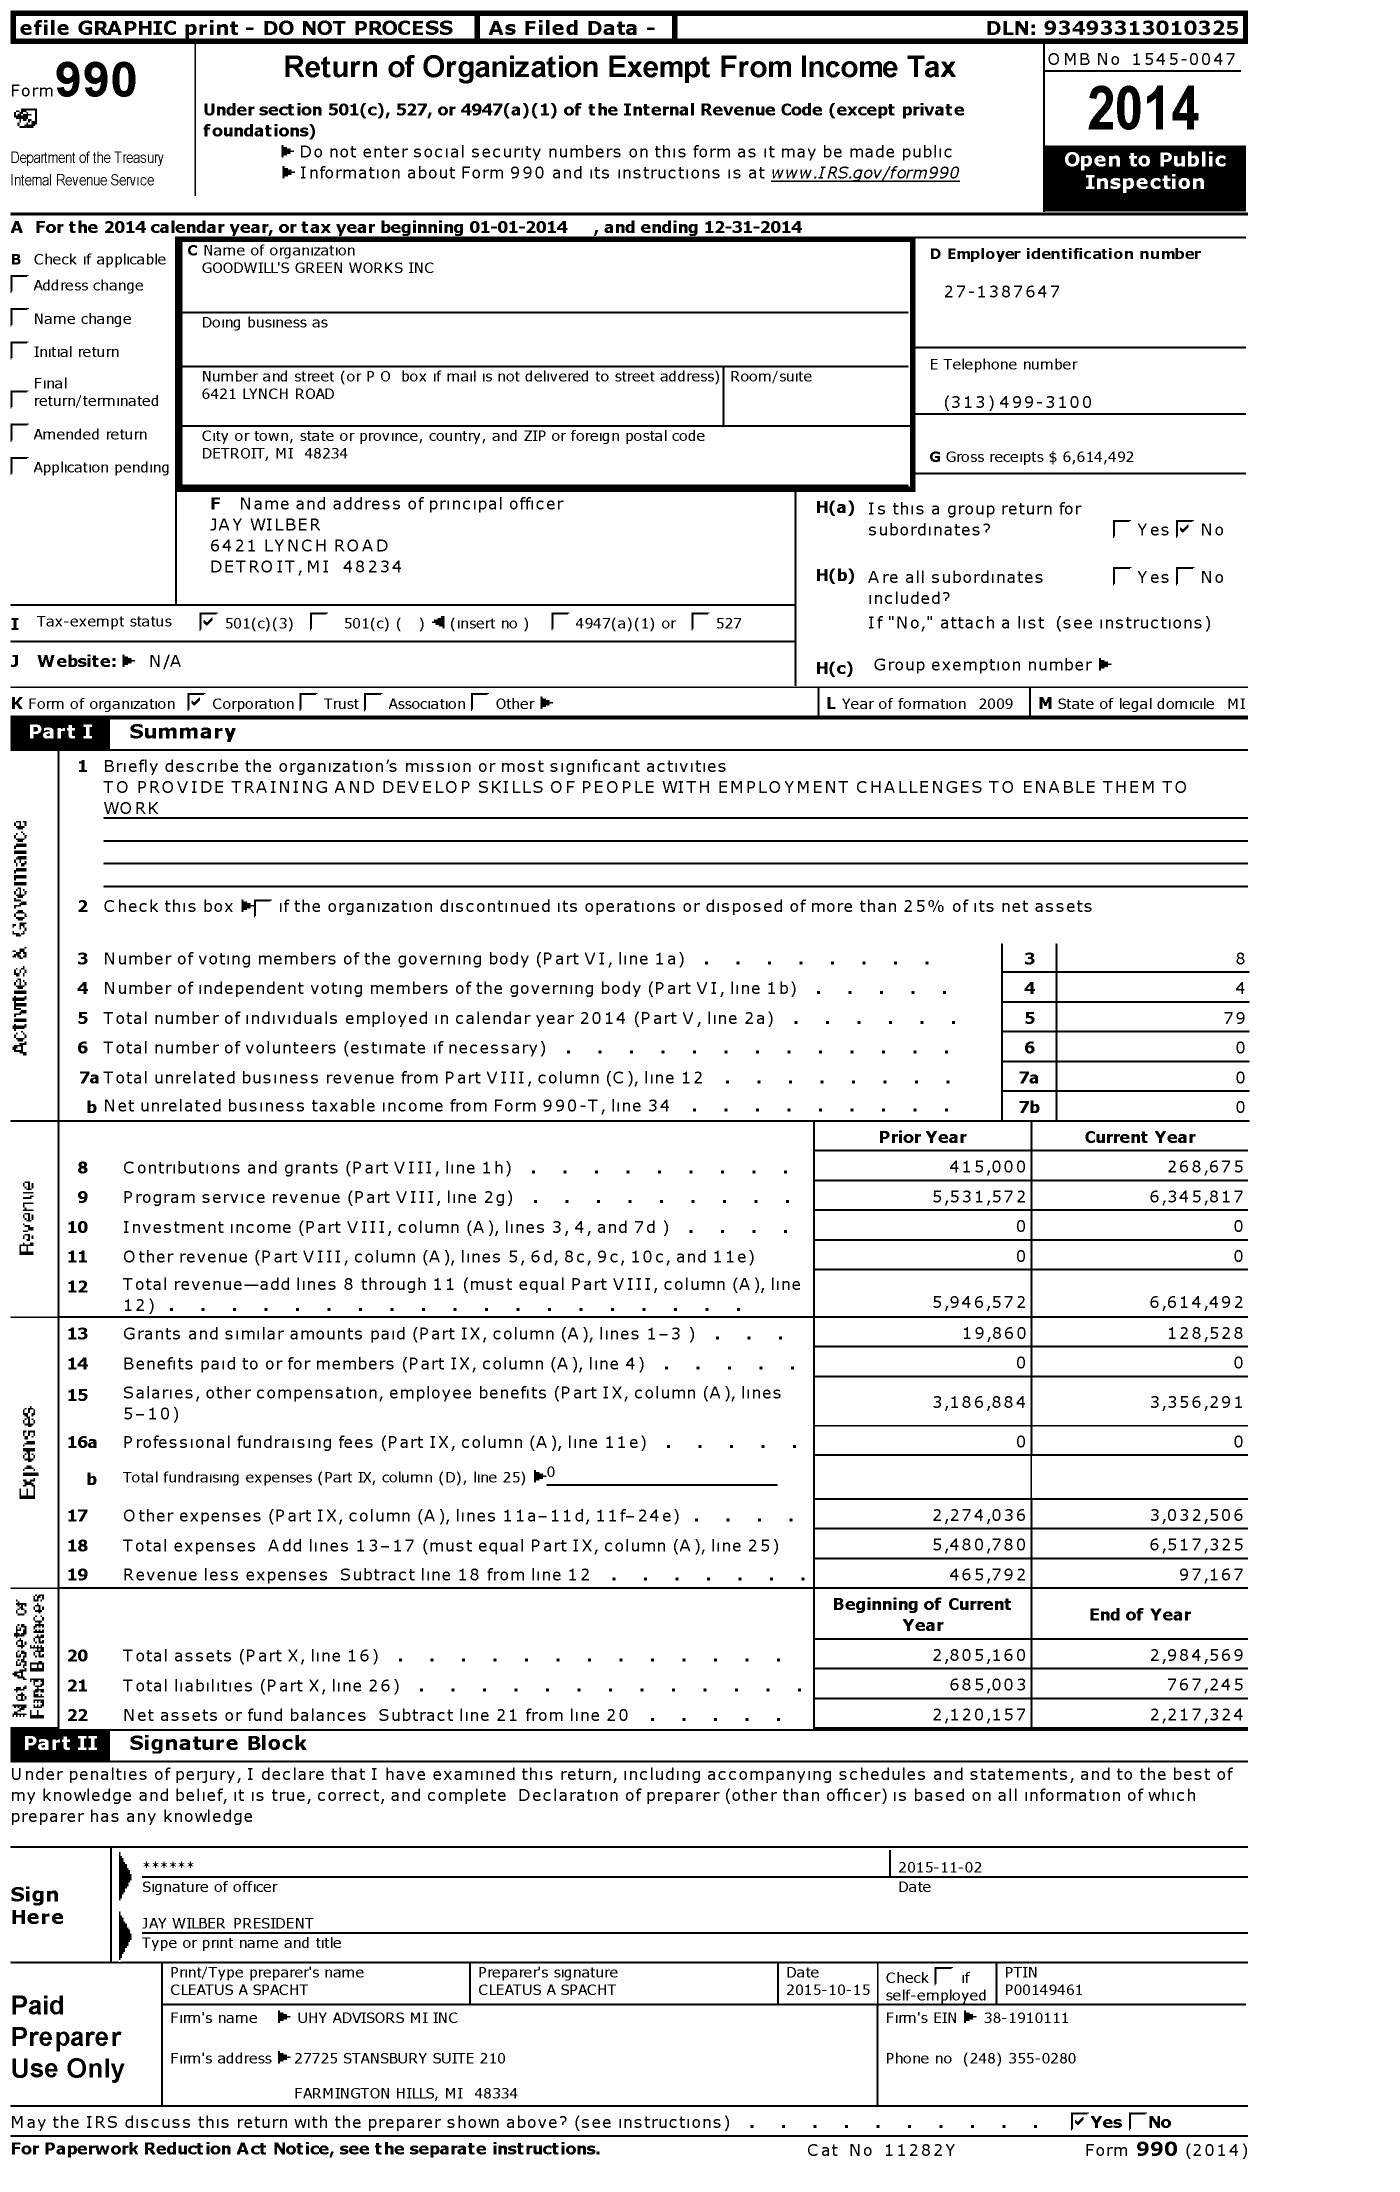 Image of first page of 2014 Form 990 for Goodwill's Green Works